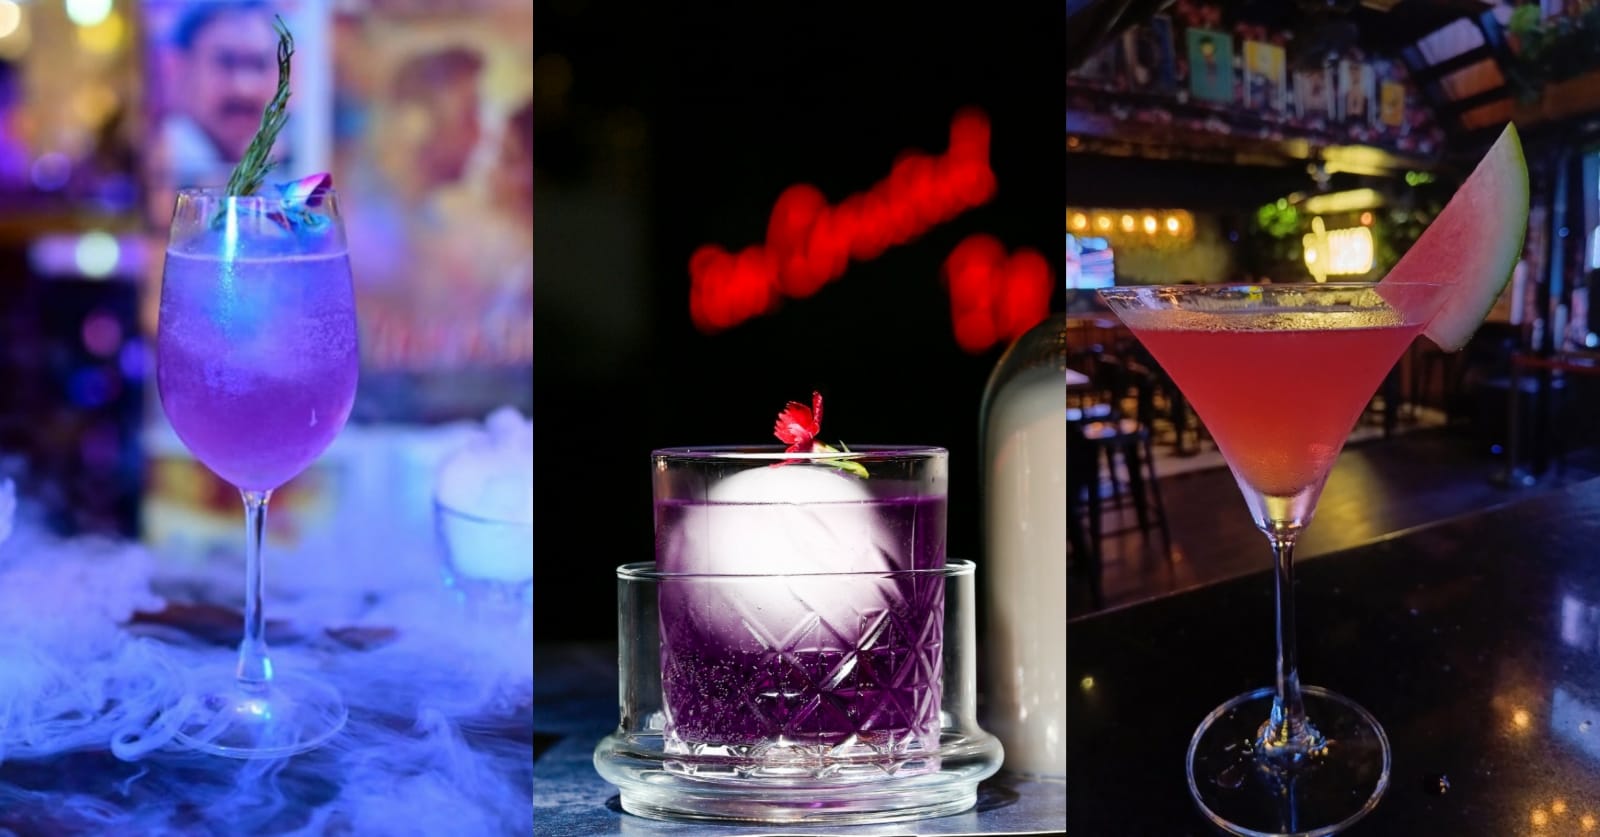 This World Gin Day, swing by these places in K-town for some fantastic Gin cocktails